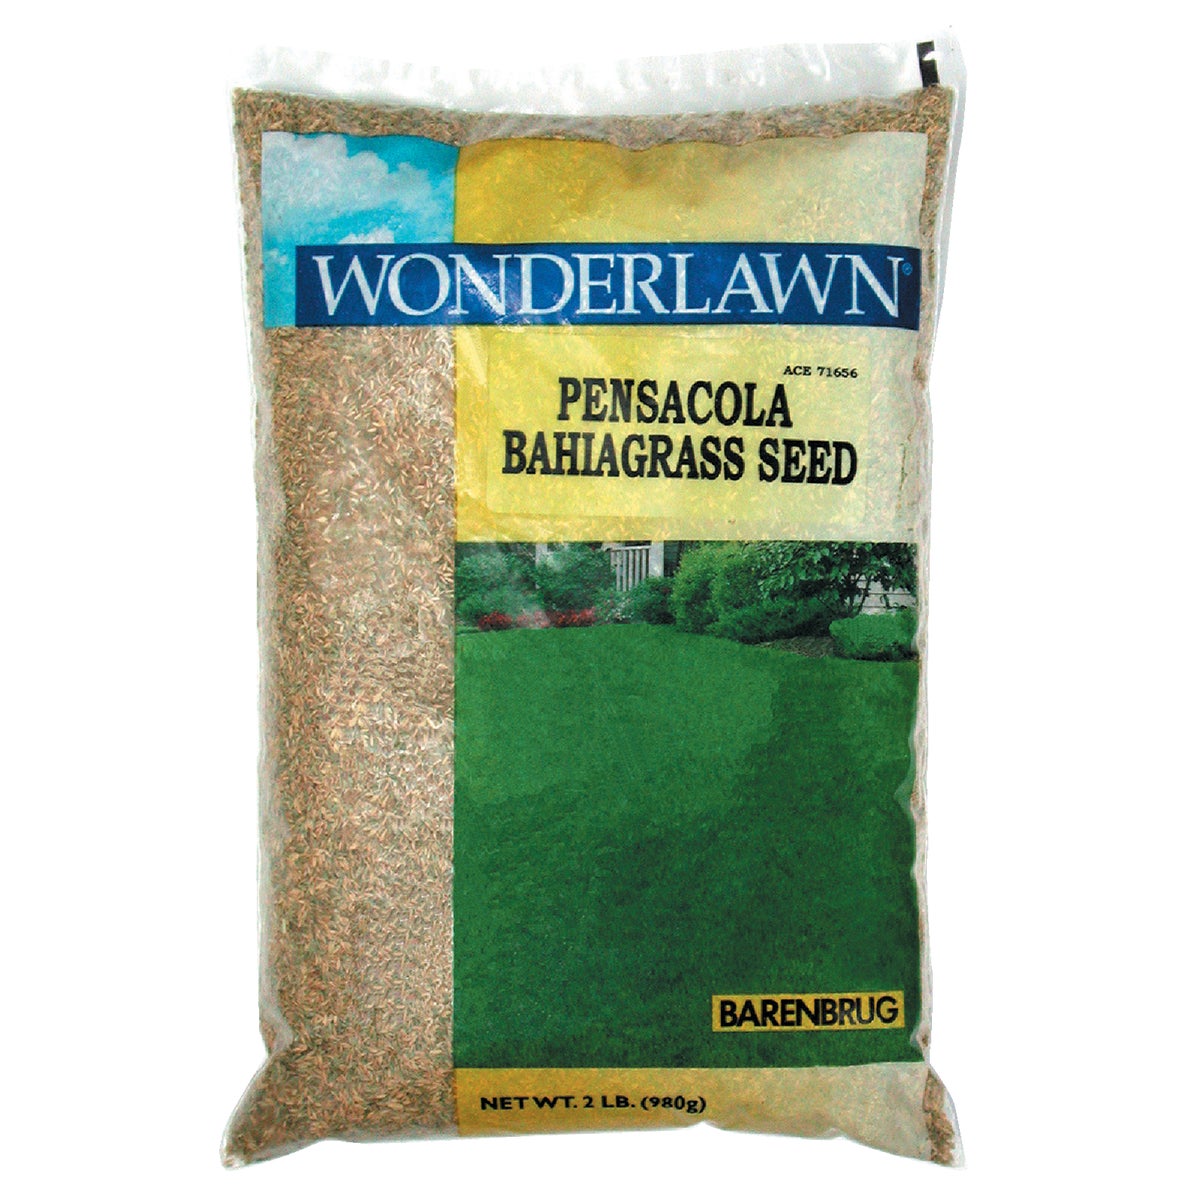 Item 751010, Grass seed that does well in full sun, high heat, and is drought resistant